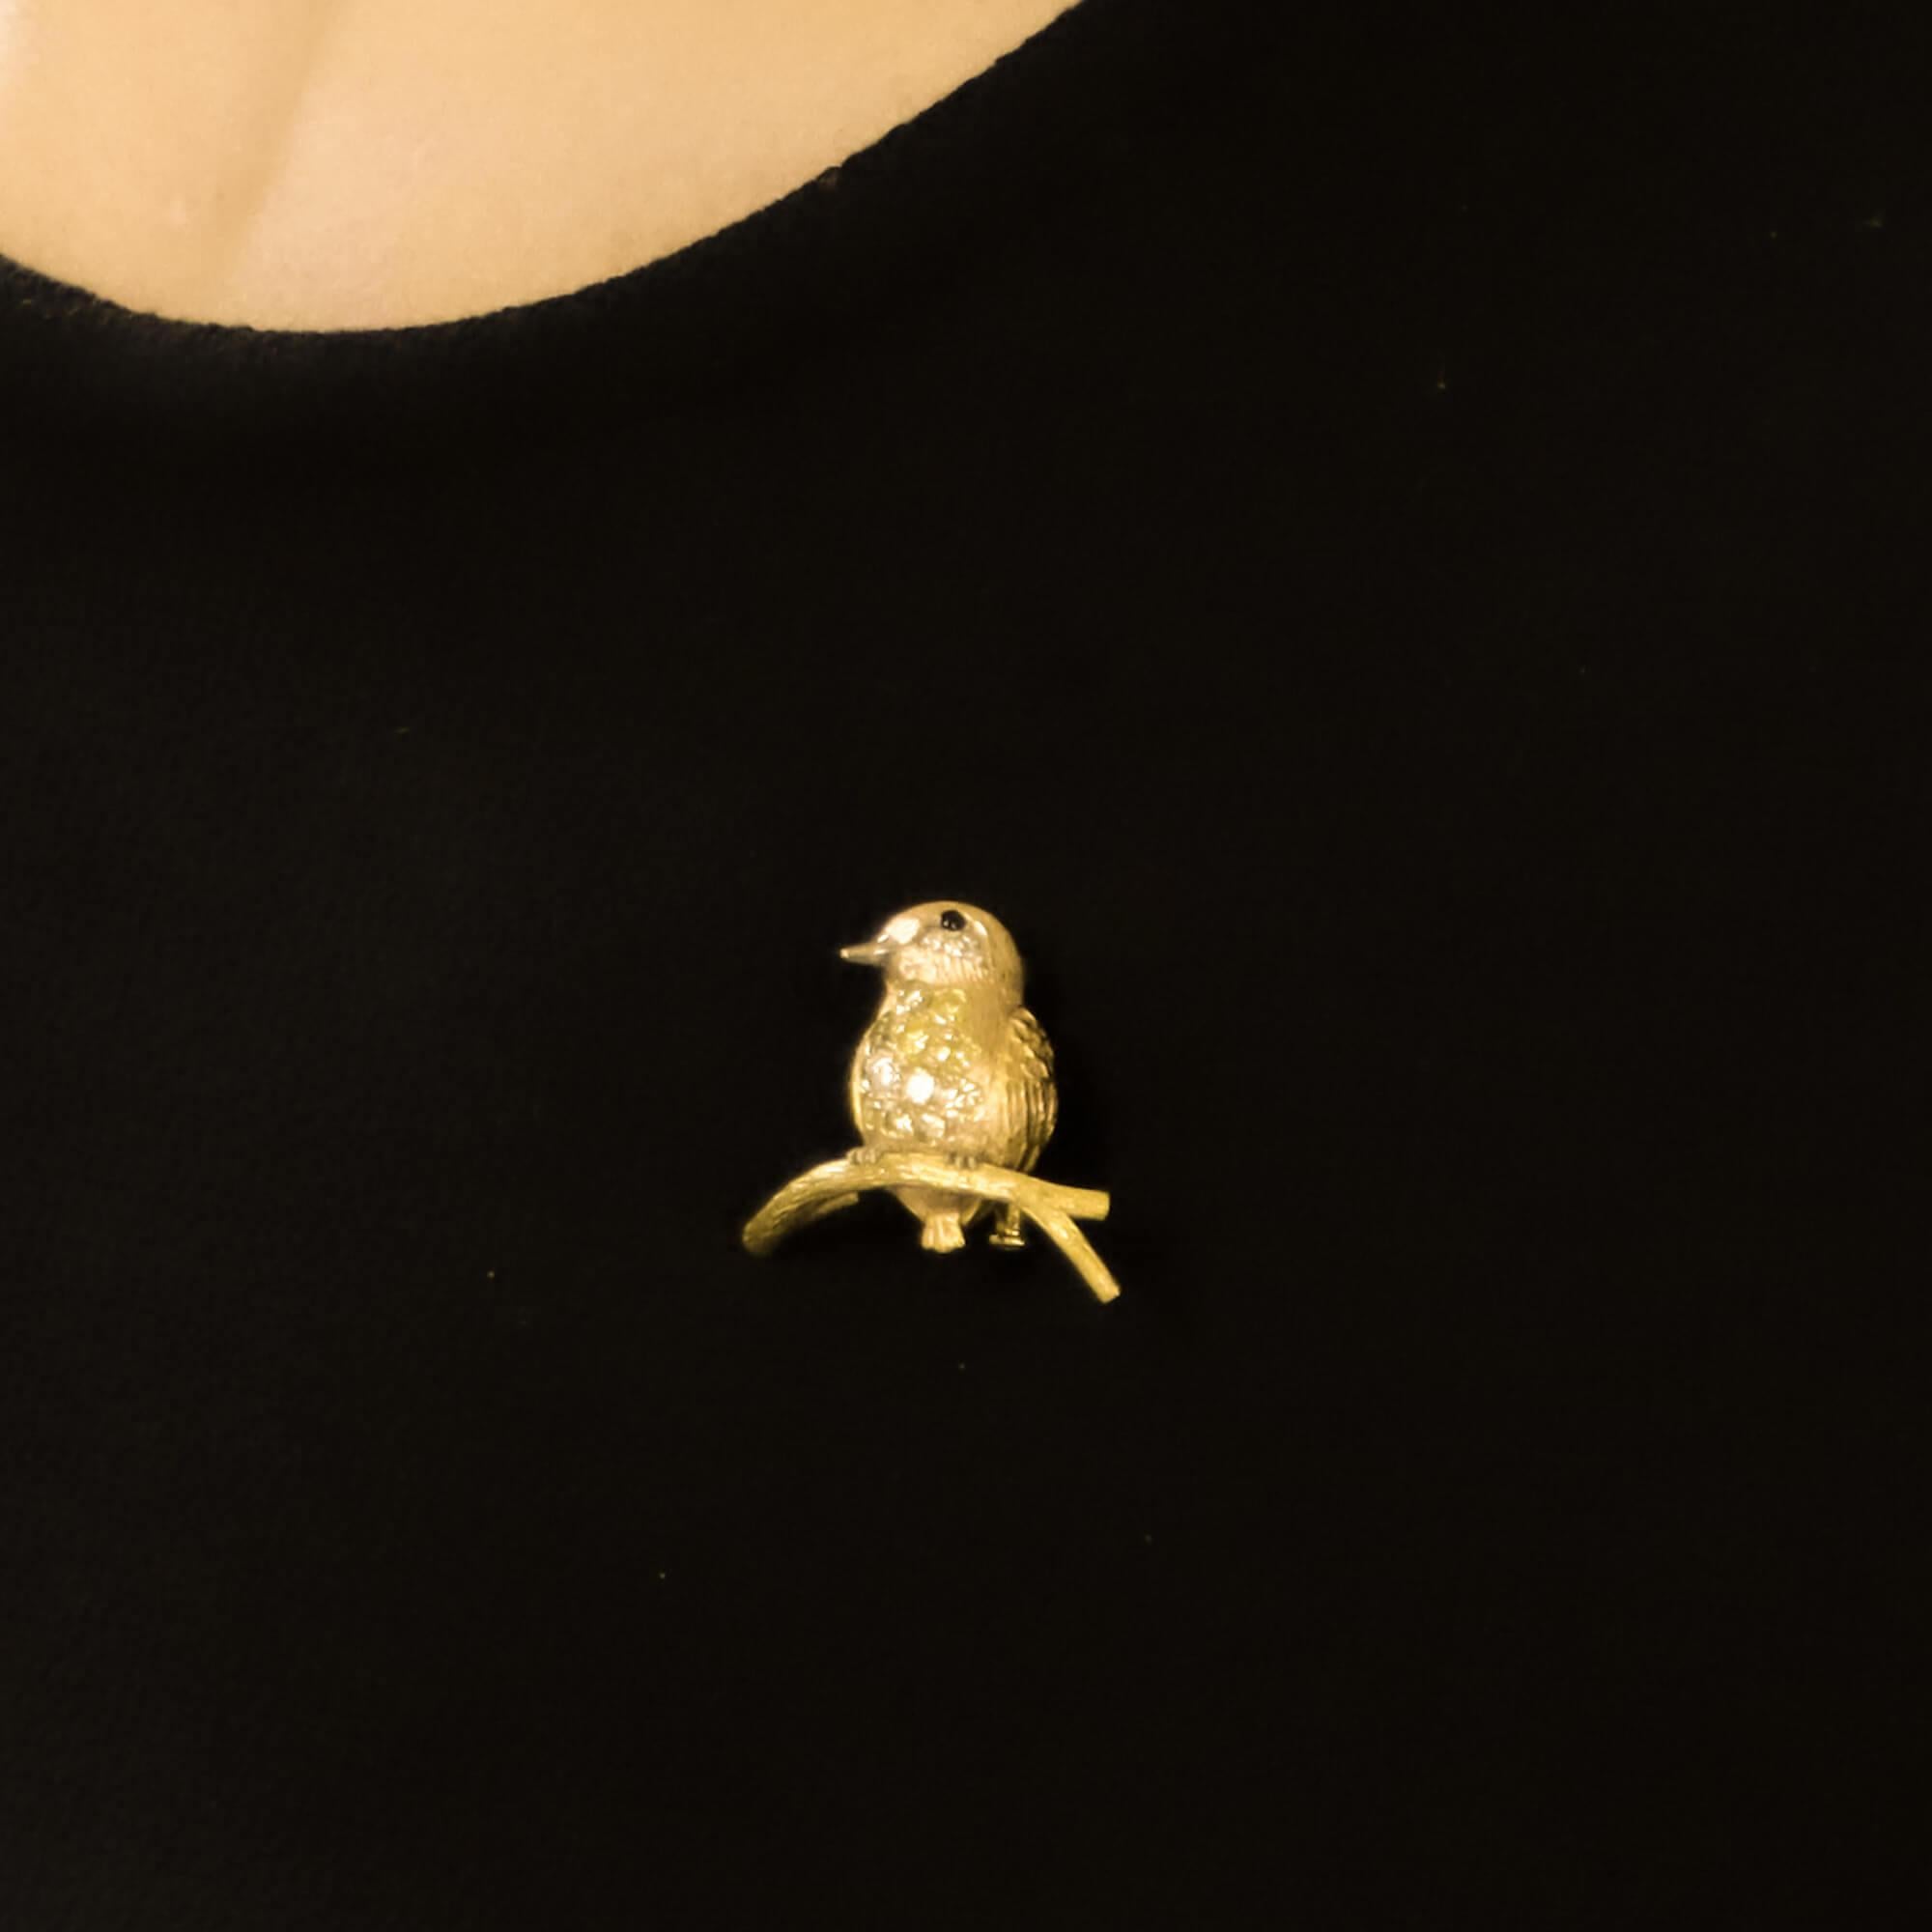 A beautiful yellow and white diamond bird pin brooch set in 18k yellow and rose gold.

The brooch depicts a sweet bird perched on a tree branch and is pavé throughout on the chest with 12 varying sizes of white and yellow round brilliant cut